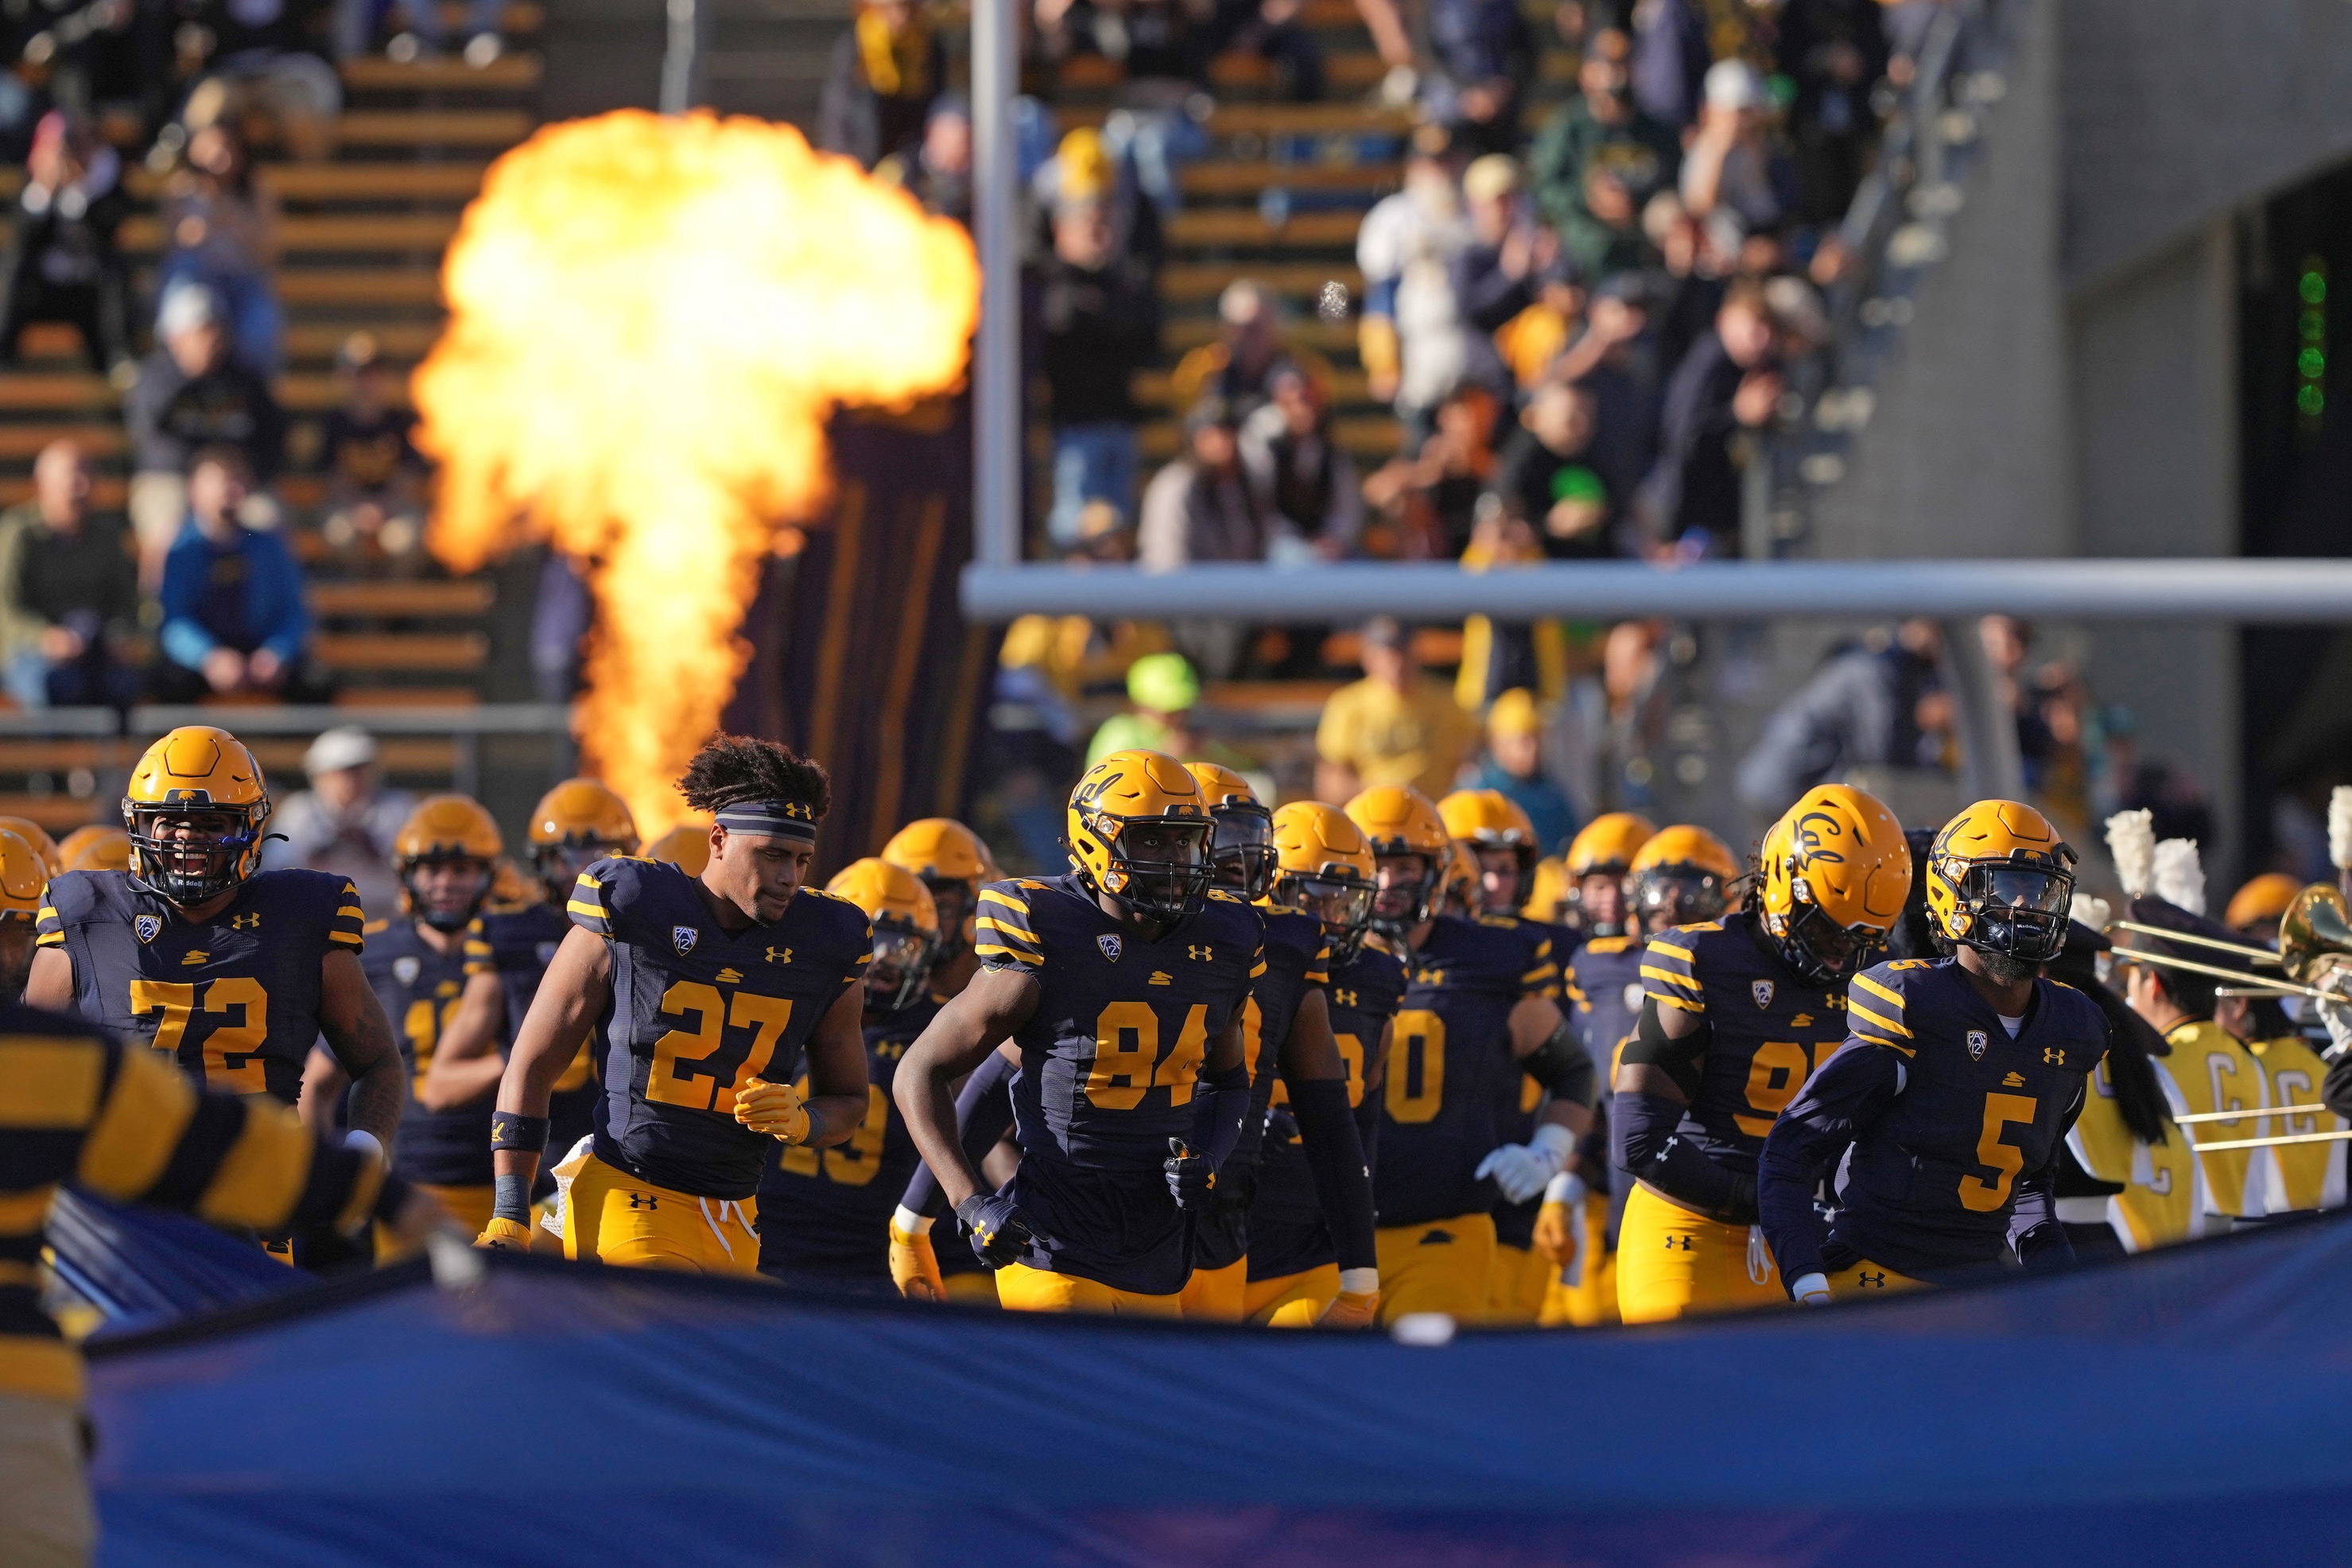 cal-s-2023-football-schedule-rated-one-of-the-toughest-in-pac-12